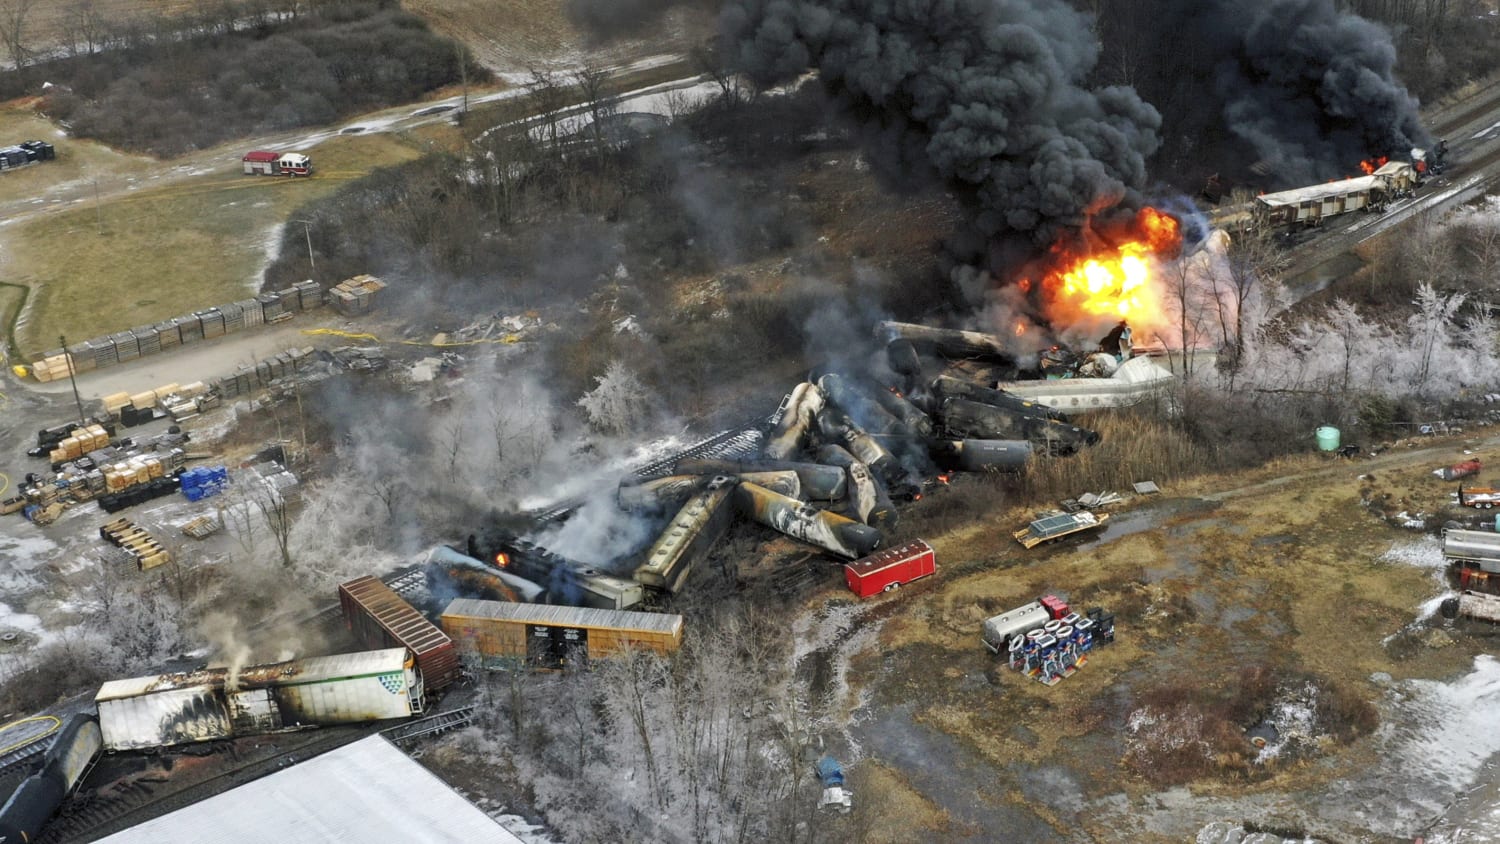 Controlled chemical release scheduled to prevent explosion in wake of Ohio train derailment